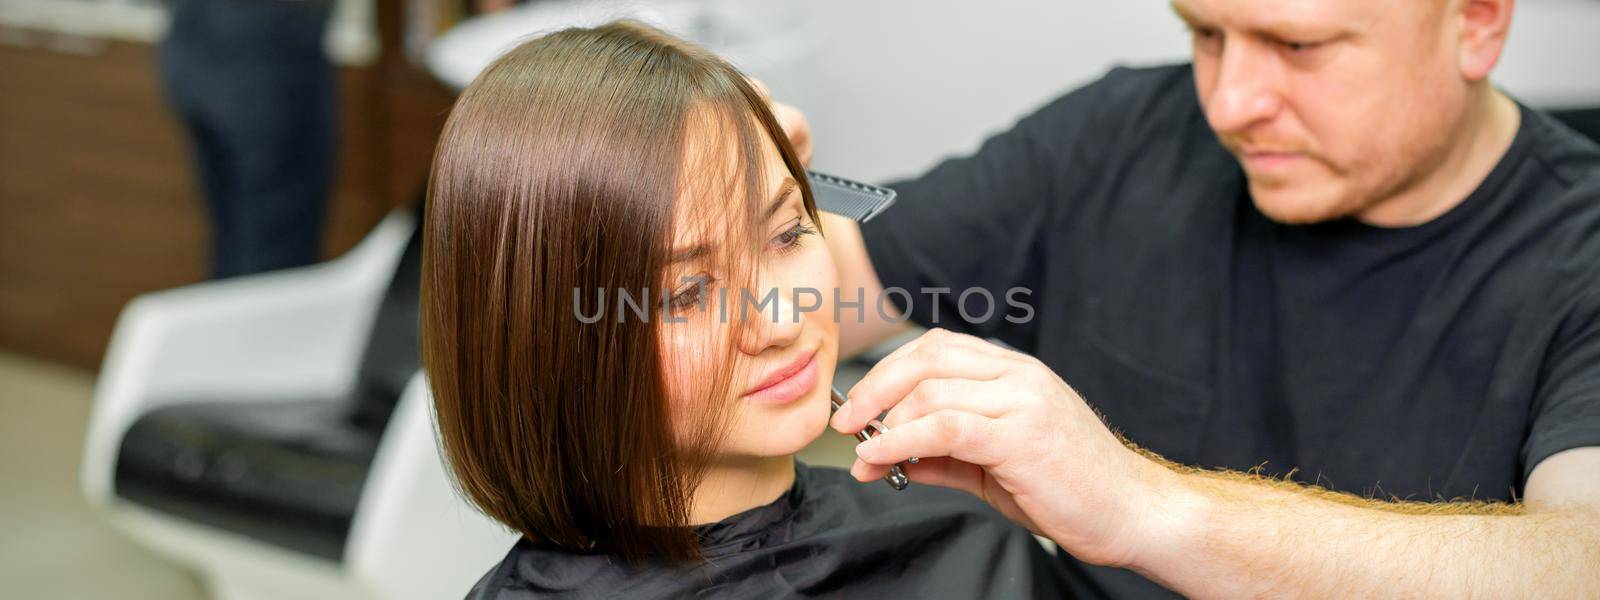 Haircut of short hair of young caucasian woman by a male hairdresser in a barbershop. by okskukuruza